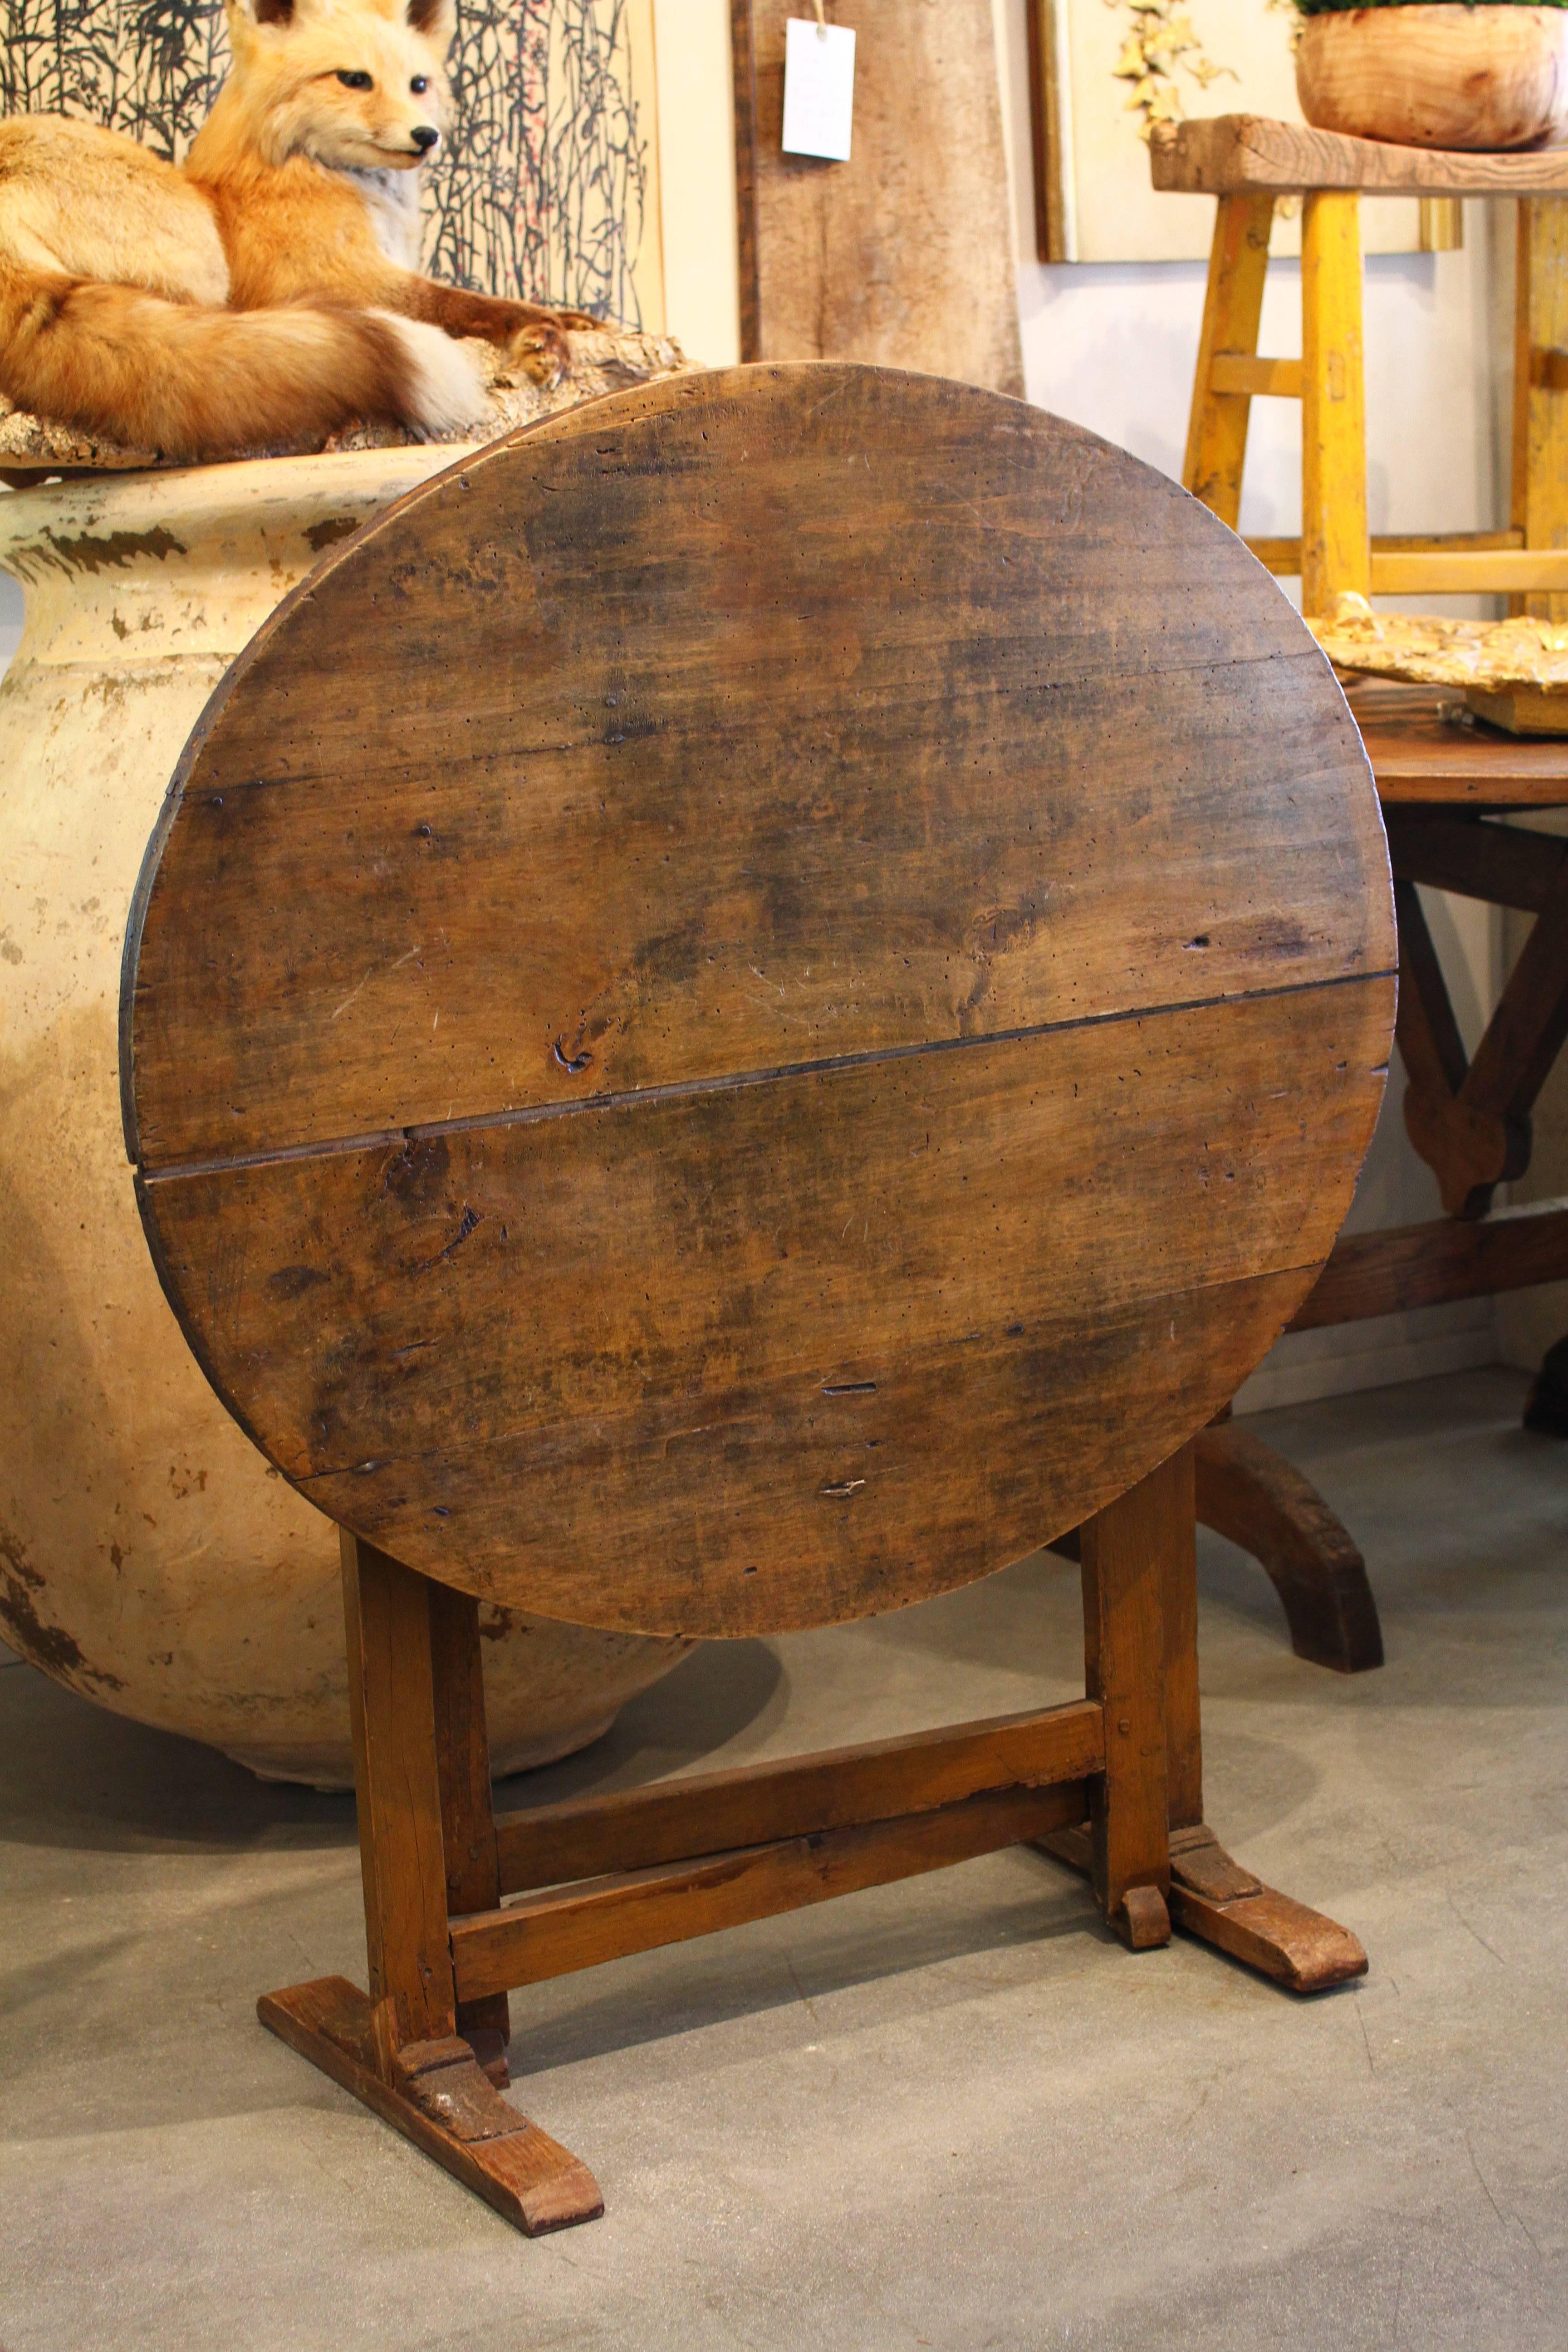 Vendage wine tasting tables were widely used in France as pop up apero opportunities in the vineyards and fields for meals and tastings. With its tilt top and gate legs, this small Vend age wine tasting table is a very versatile size and would be